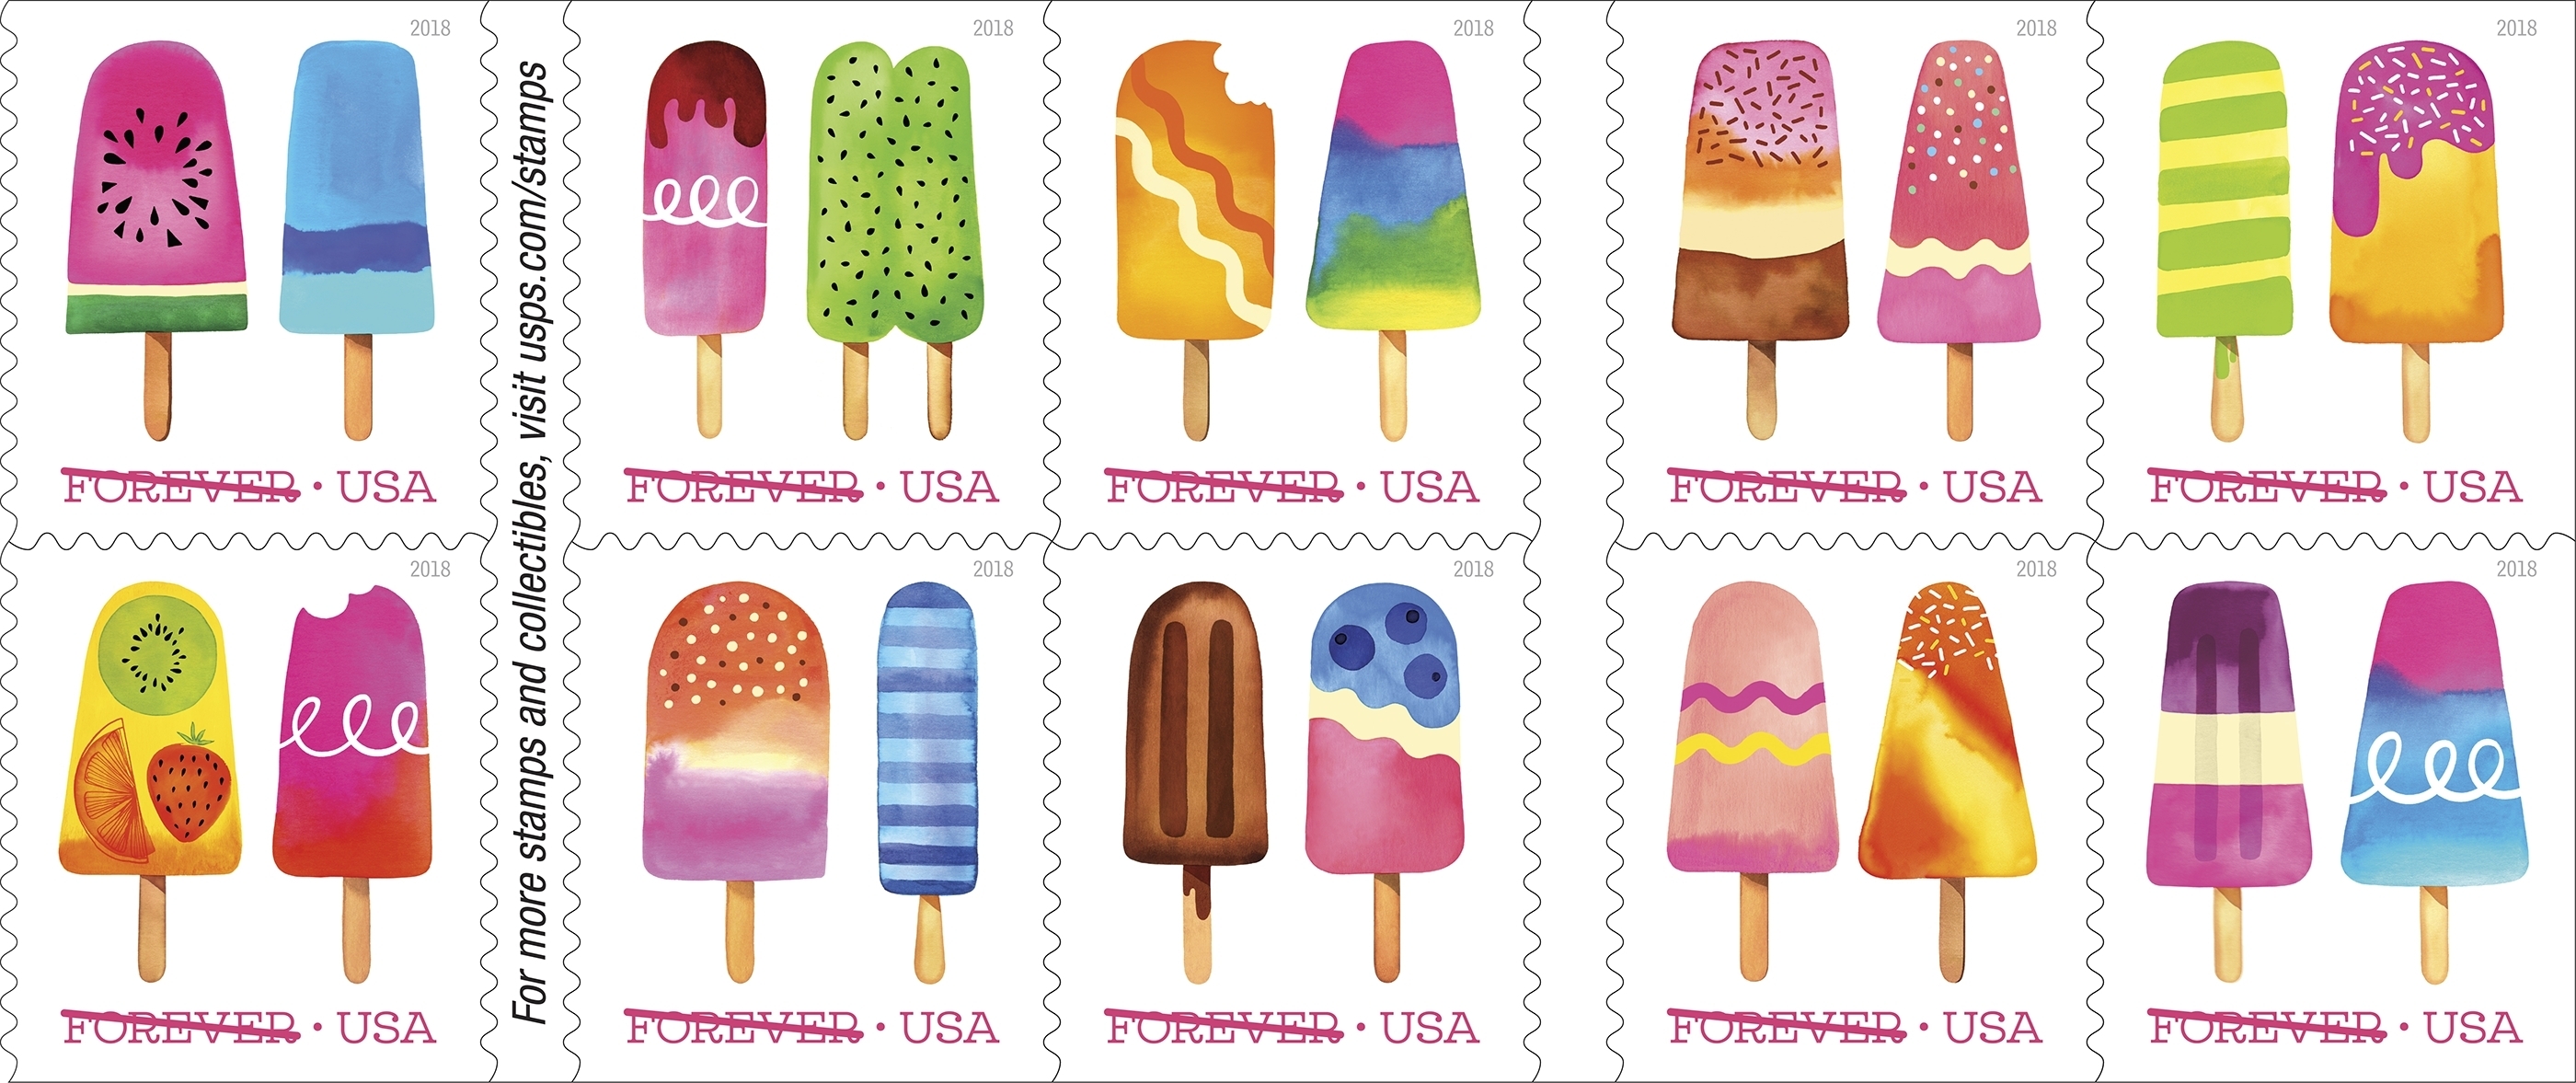 The first scratch-and-sniff stamps from the U.S. Postal Service.